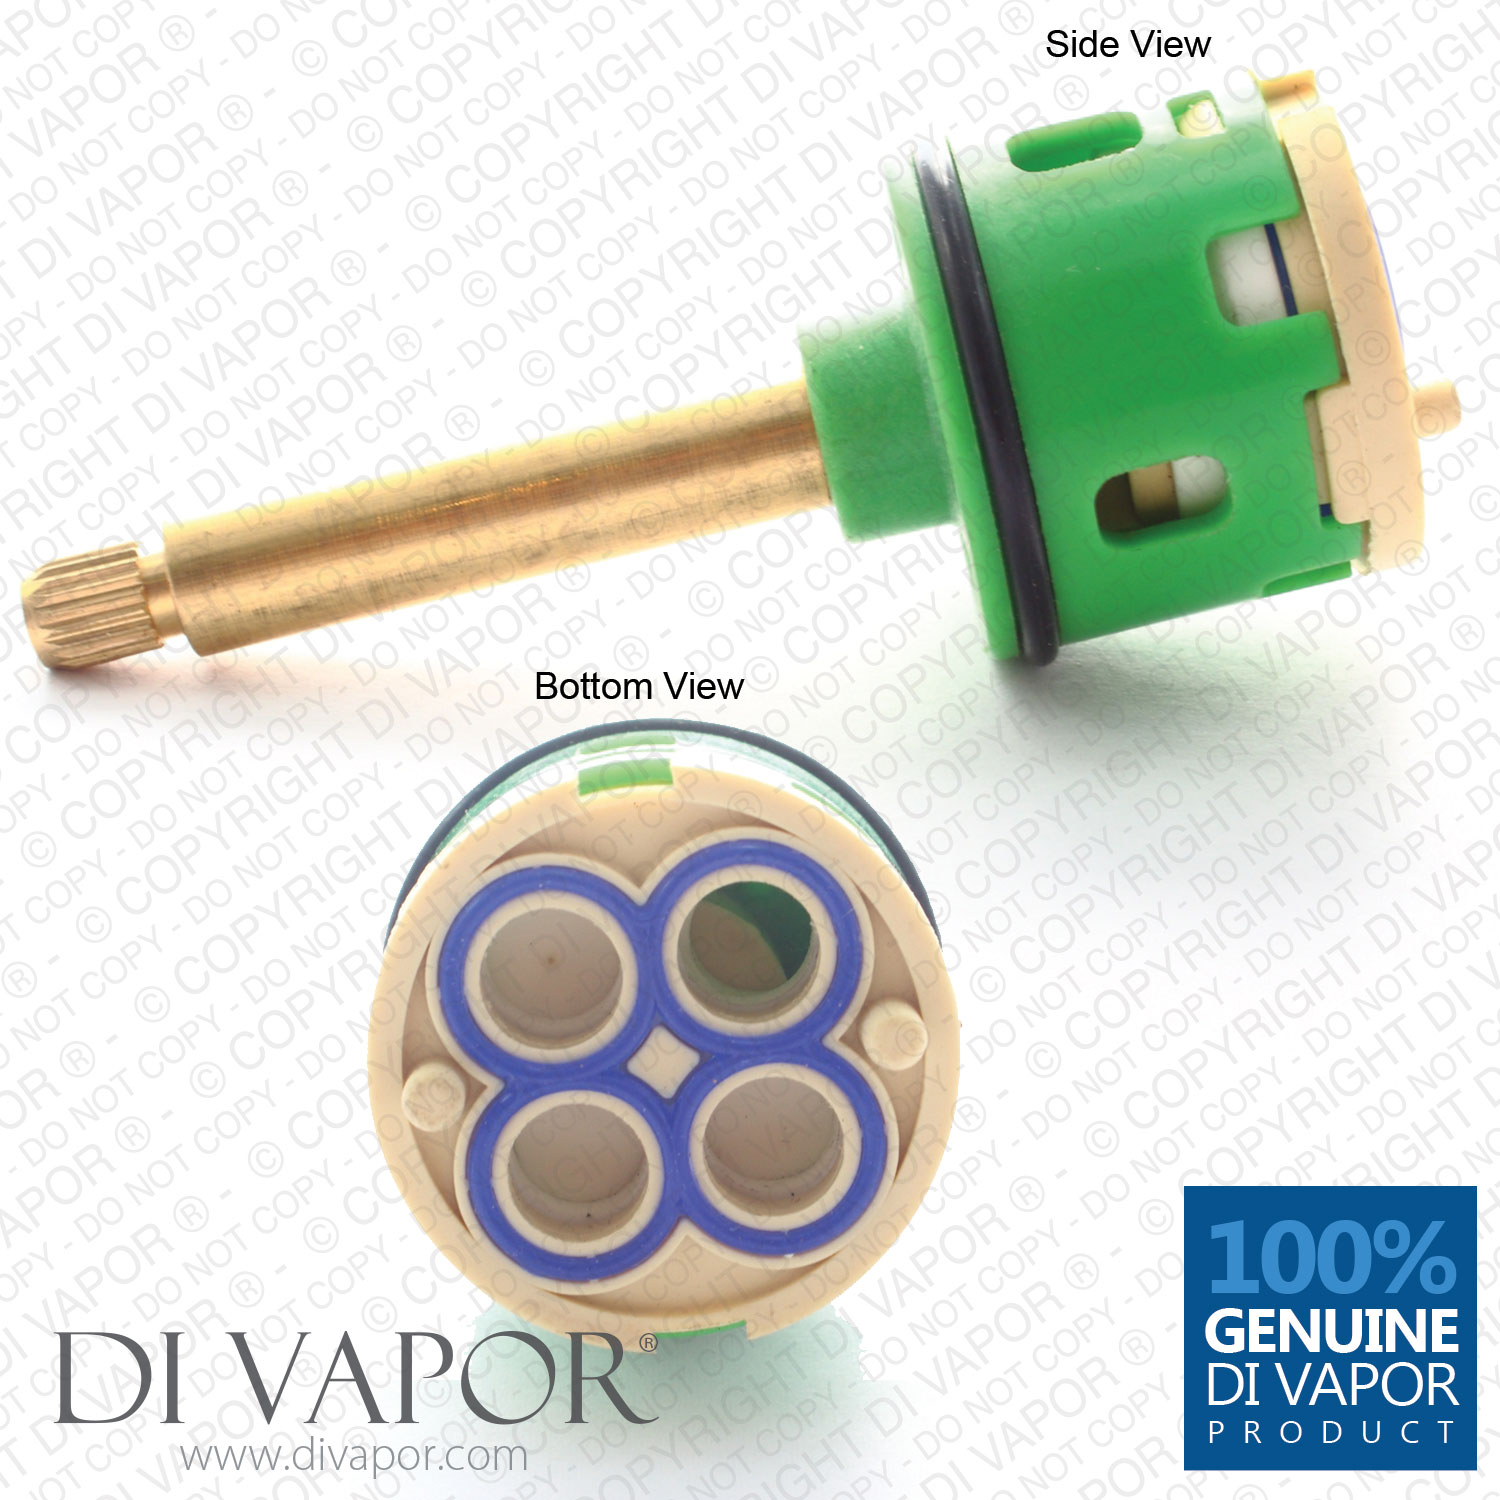 92mm 4-Way Shower Flow Diverter Valve Cartridge - (54mm Brass Spindle) Tap Central Core - O Ring Push Fit